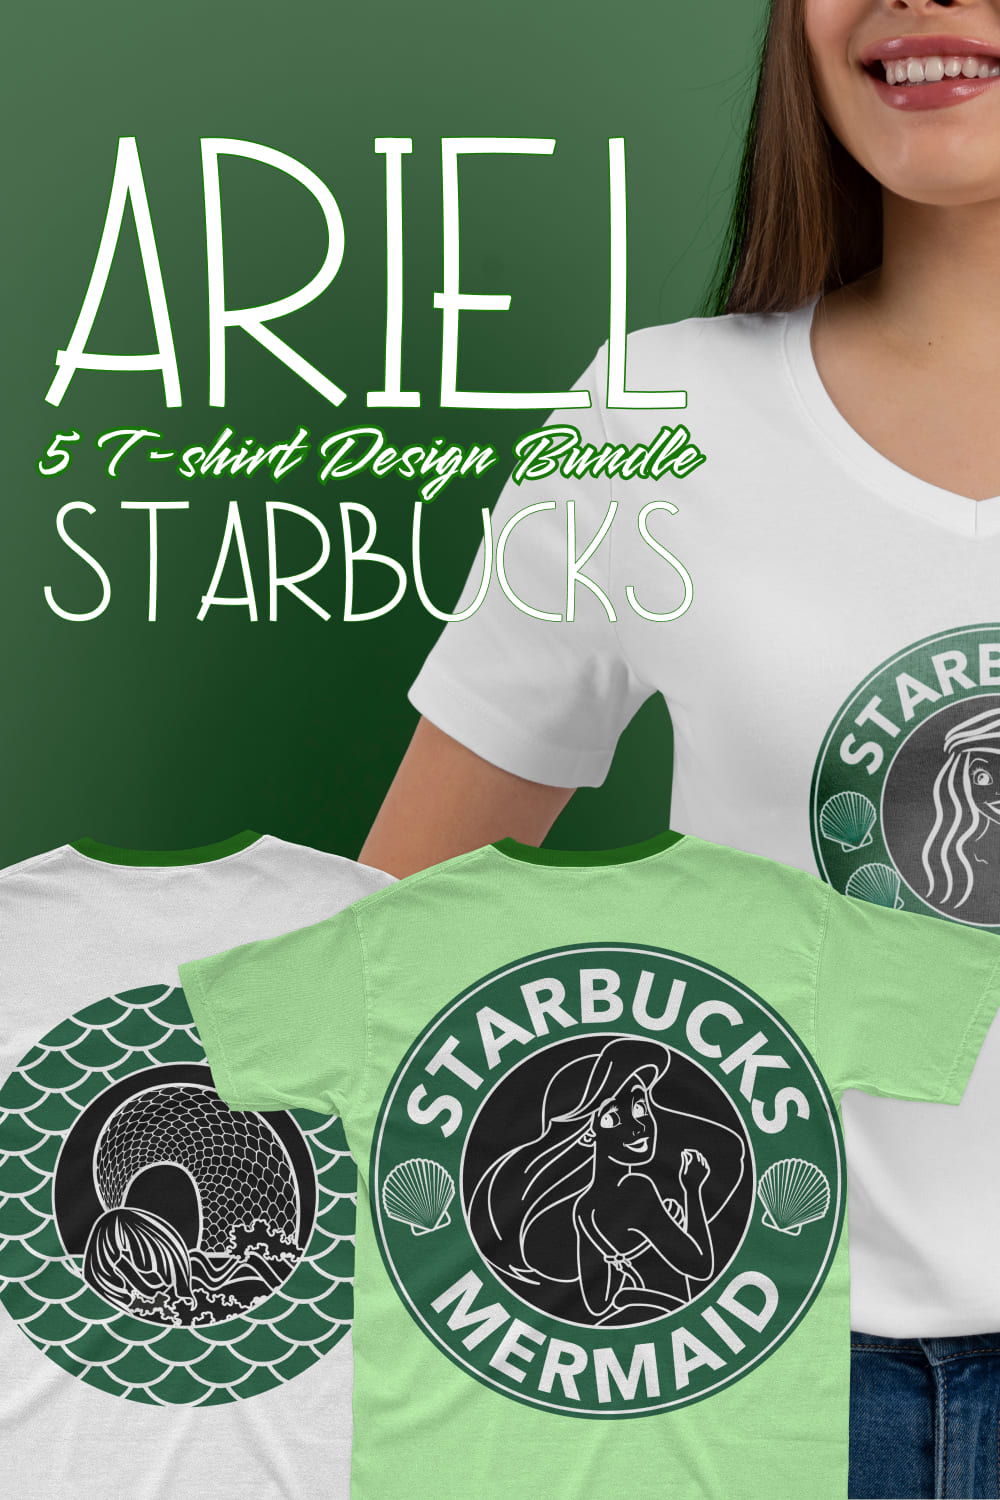 Pinterest images with ariel starbucks.